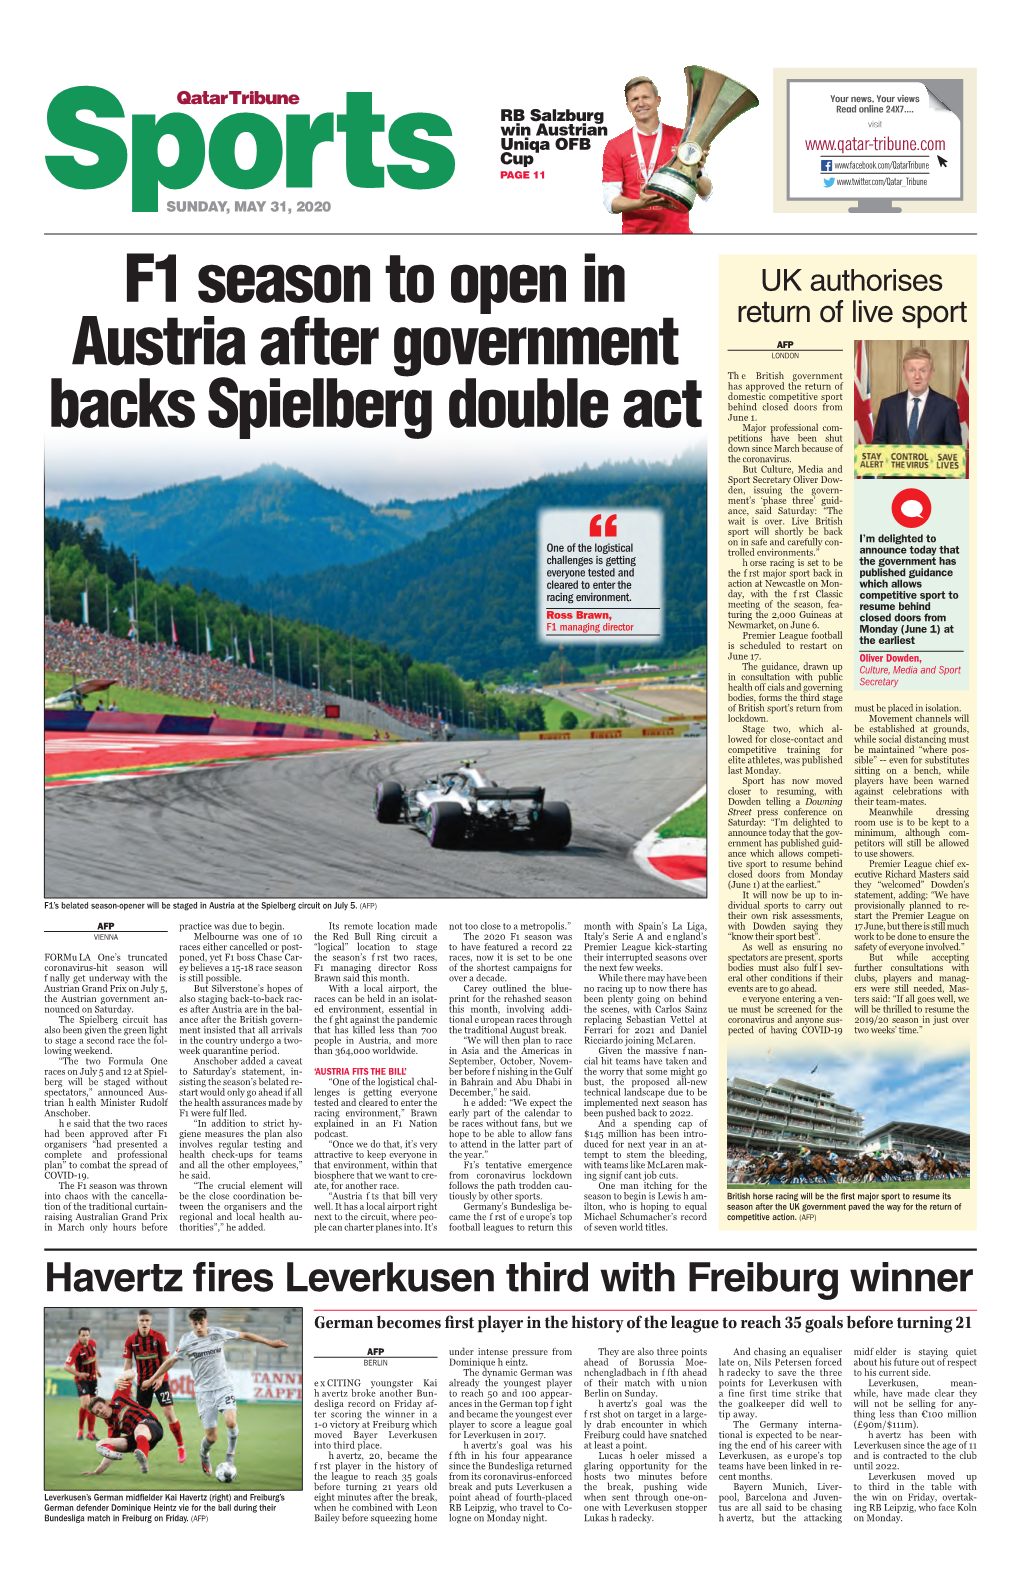 F1 Season to Open in Austria After Government Backs Spielberg Double